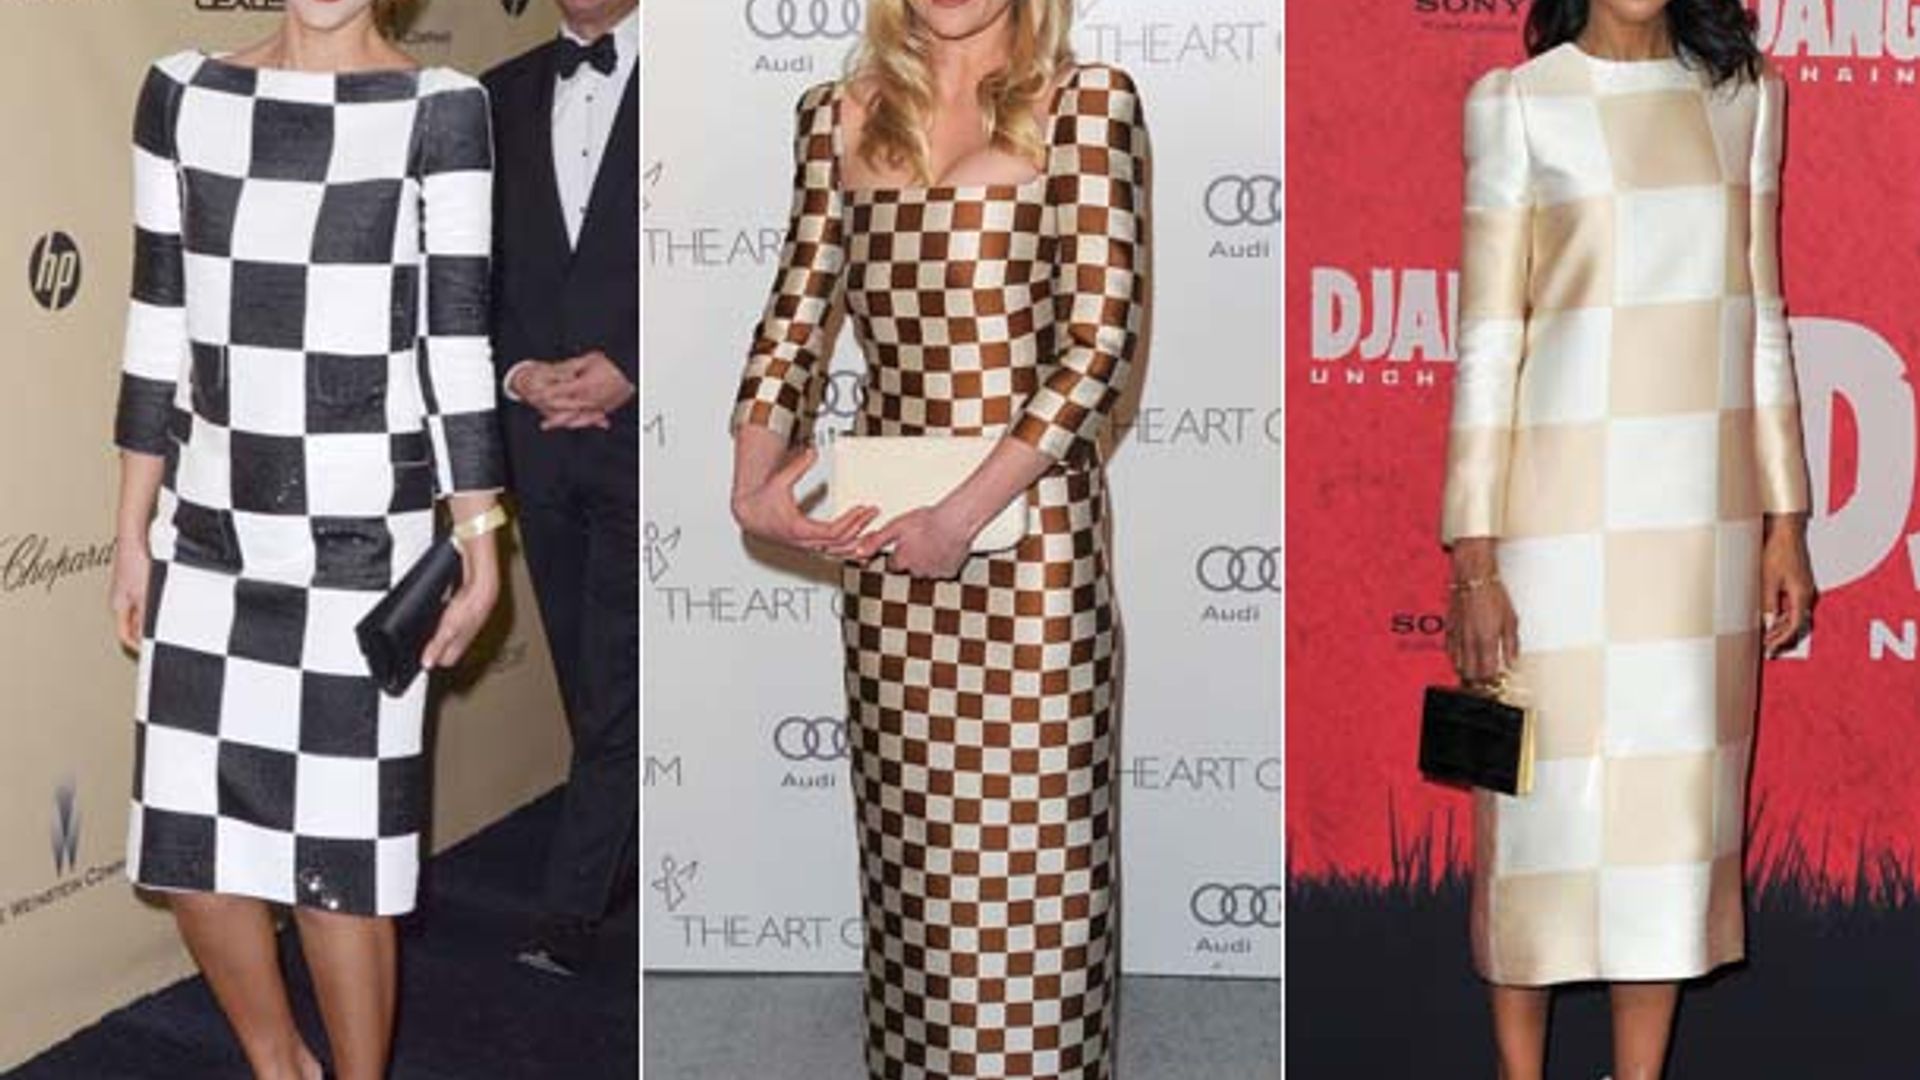 Don't Leave Home Without It: Celebrities and Their Louis Vuitton